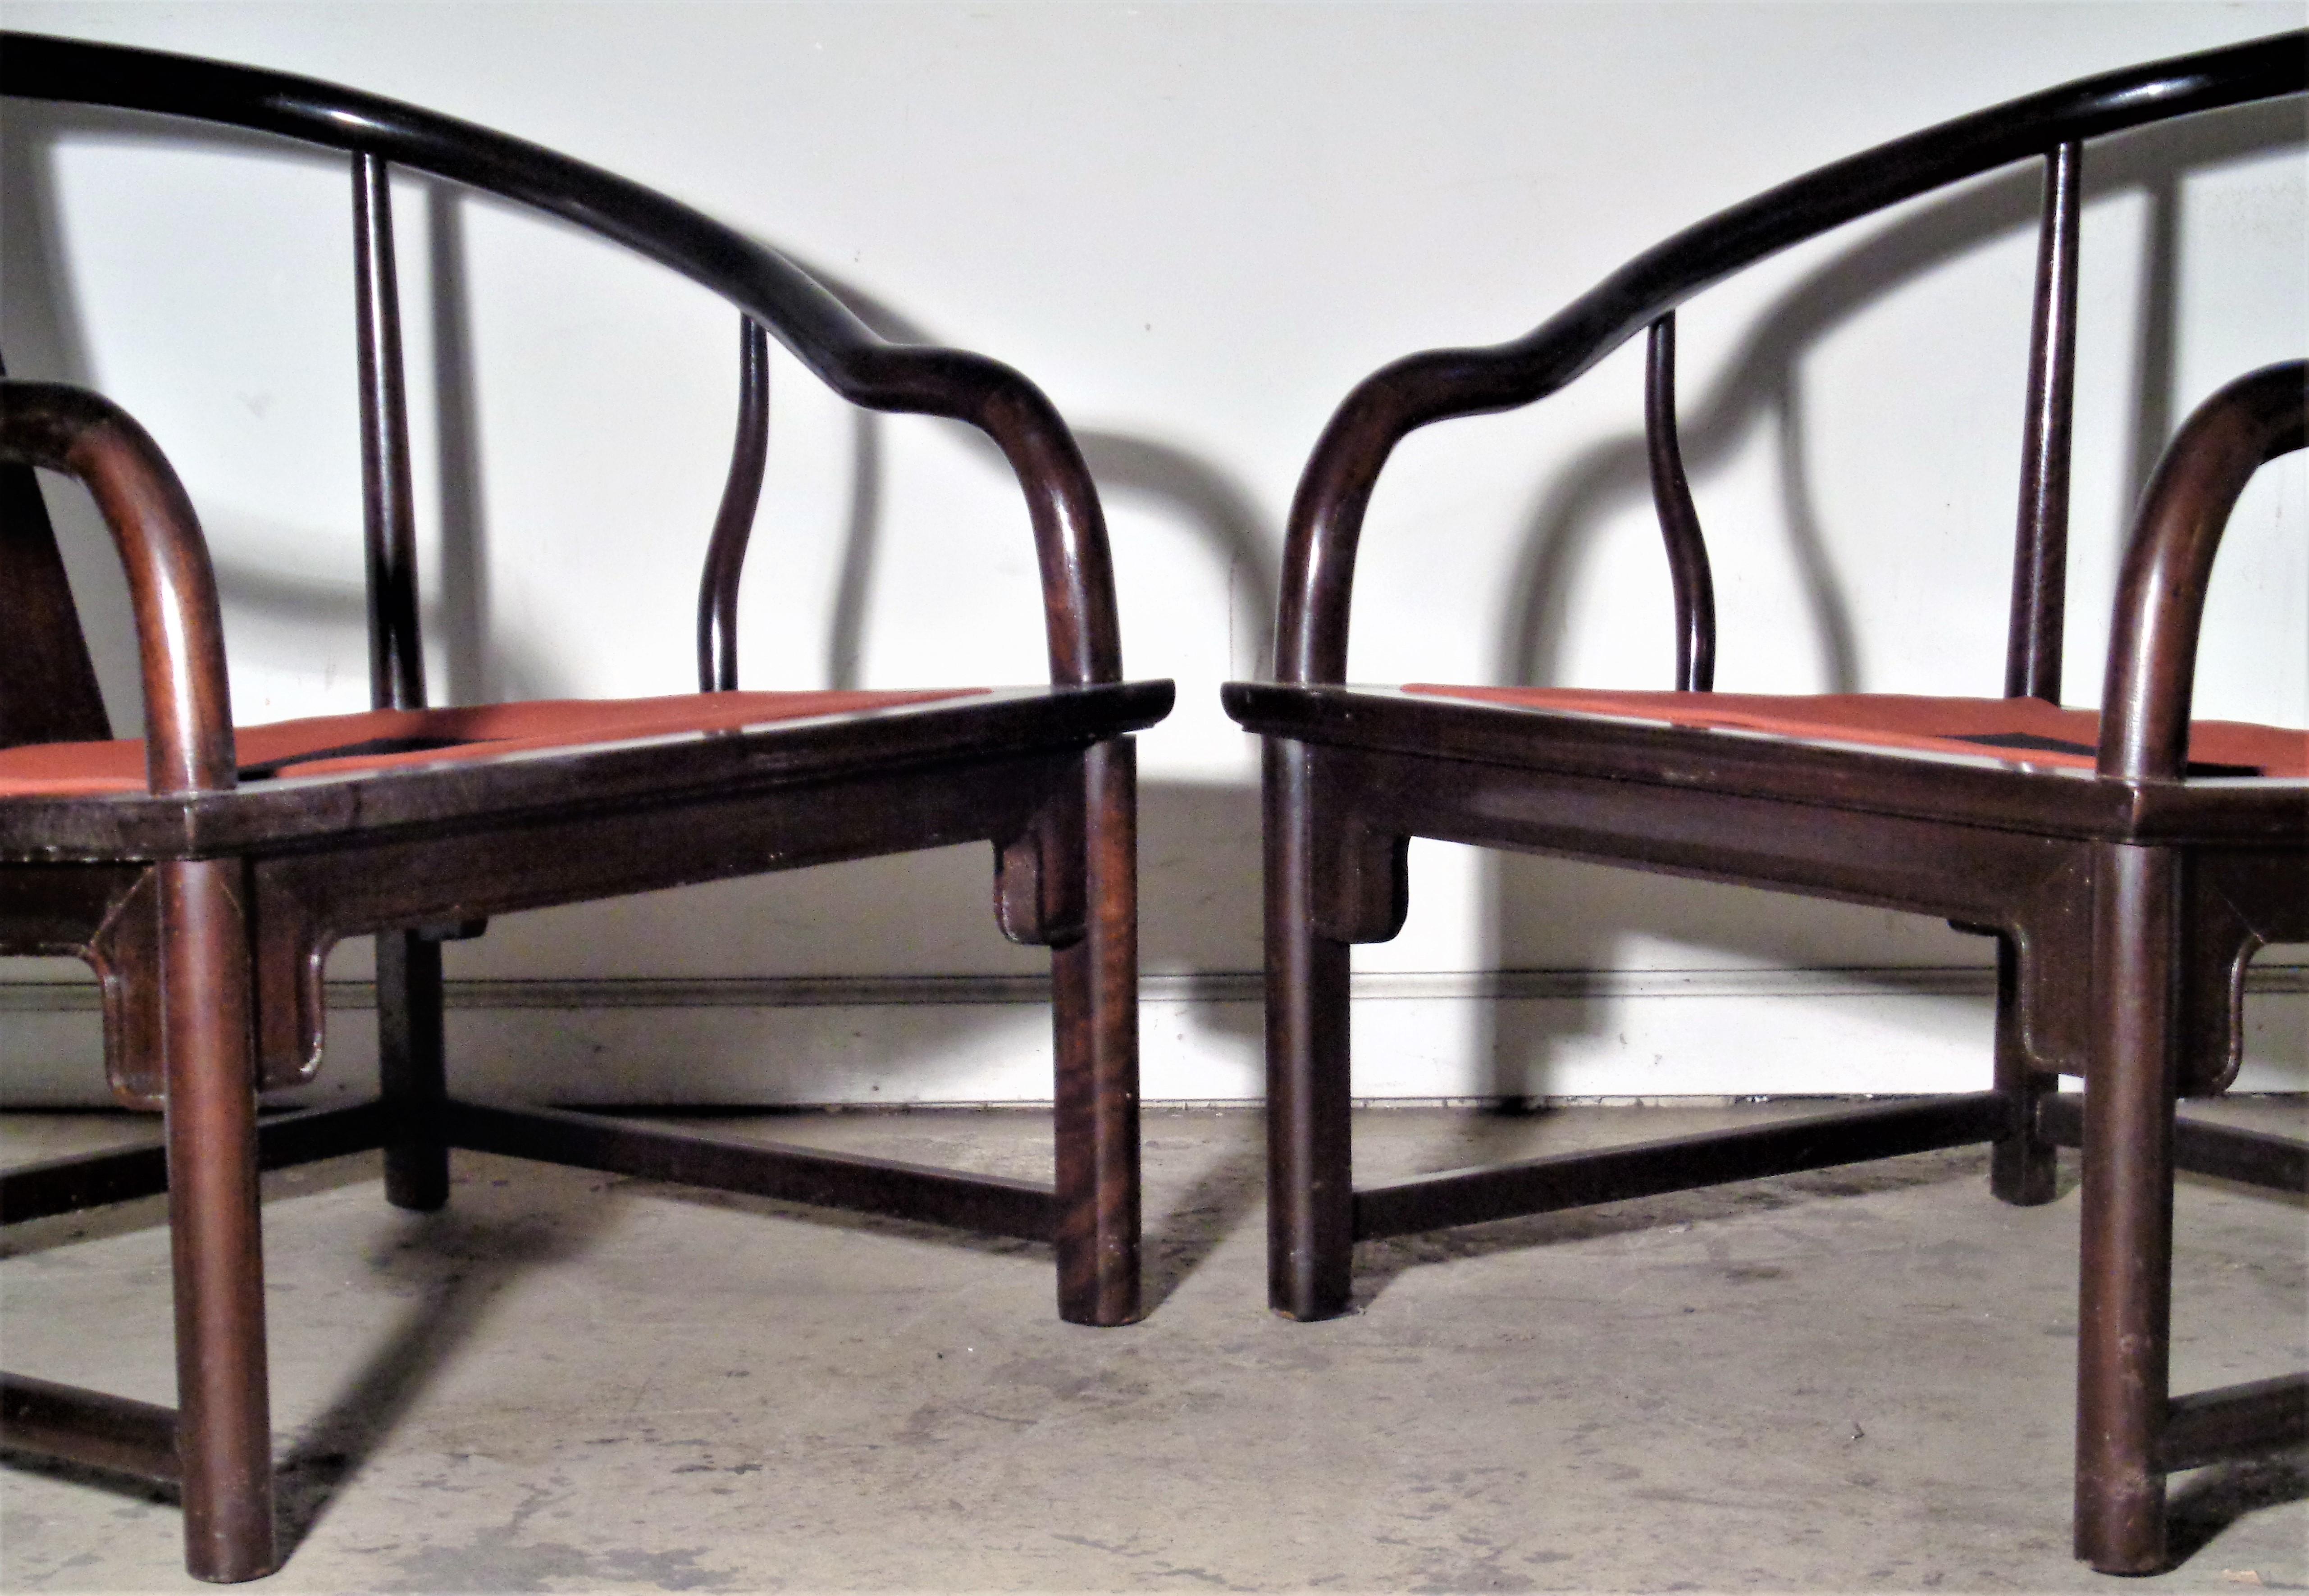 Pair of Asian Modern walnut lounge chairs with original ultra-suede type upholstered seat and back cushions. In the style of Michael Taylor - Far East Collection for Baker Furniture. Circa 1960. Measure 28 1/2 inches high x 26 inches deep x 31